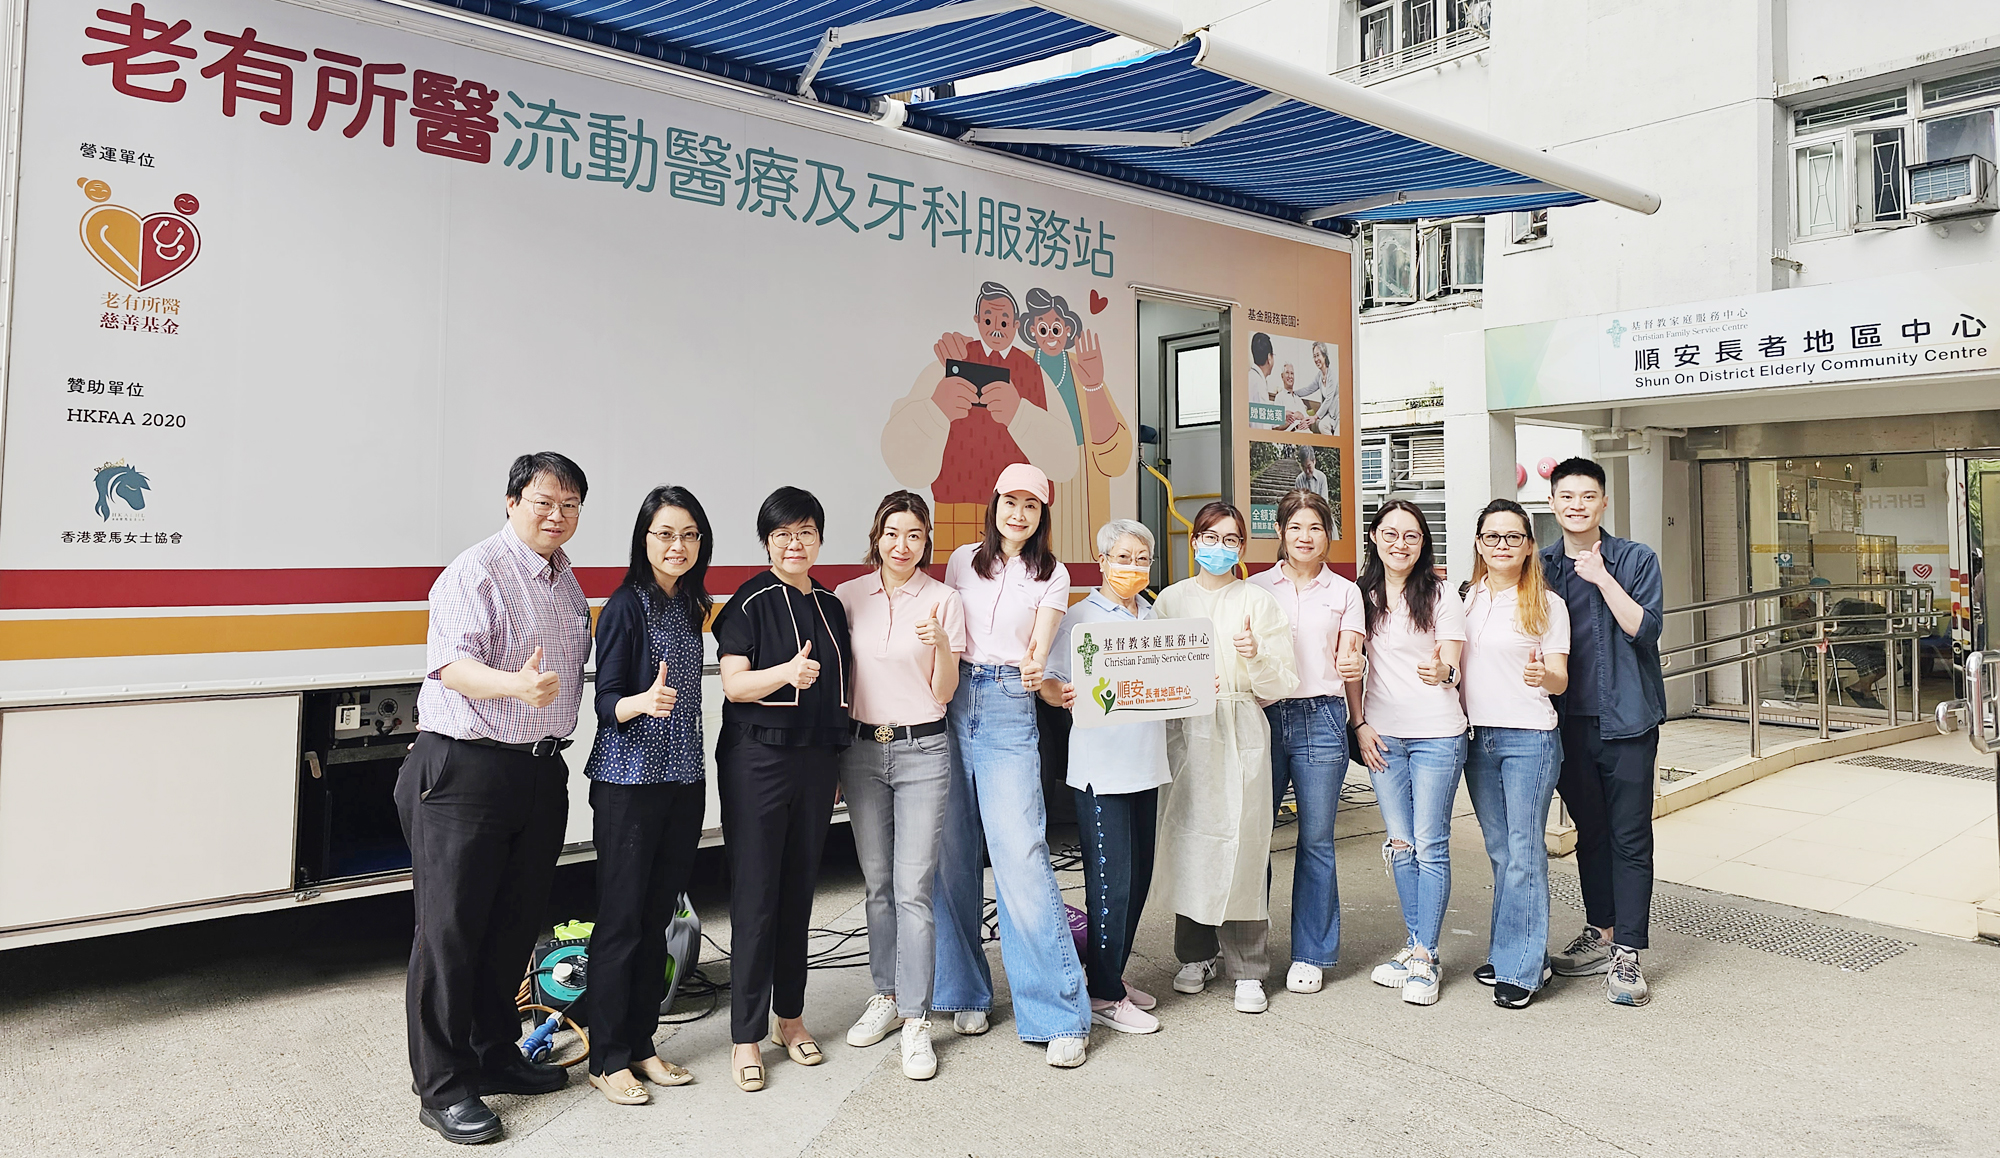 Cover Image - Free Medical Consultation Day in Shun On District Elderly Community Centre